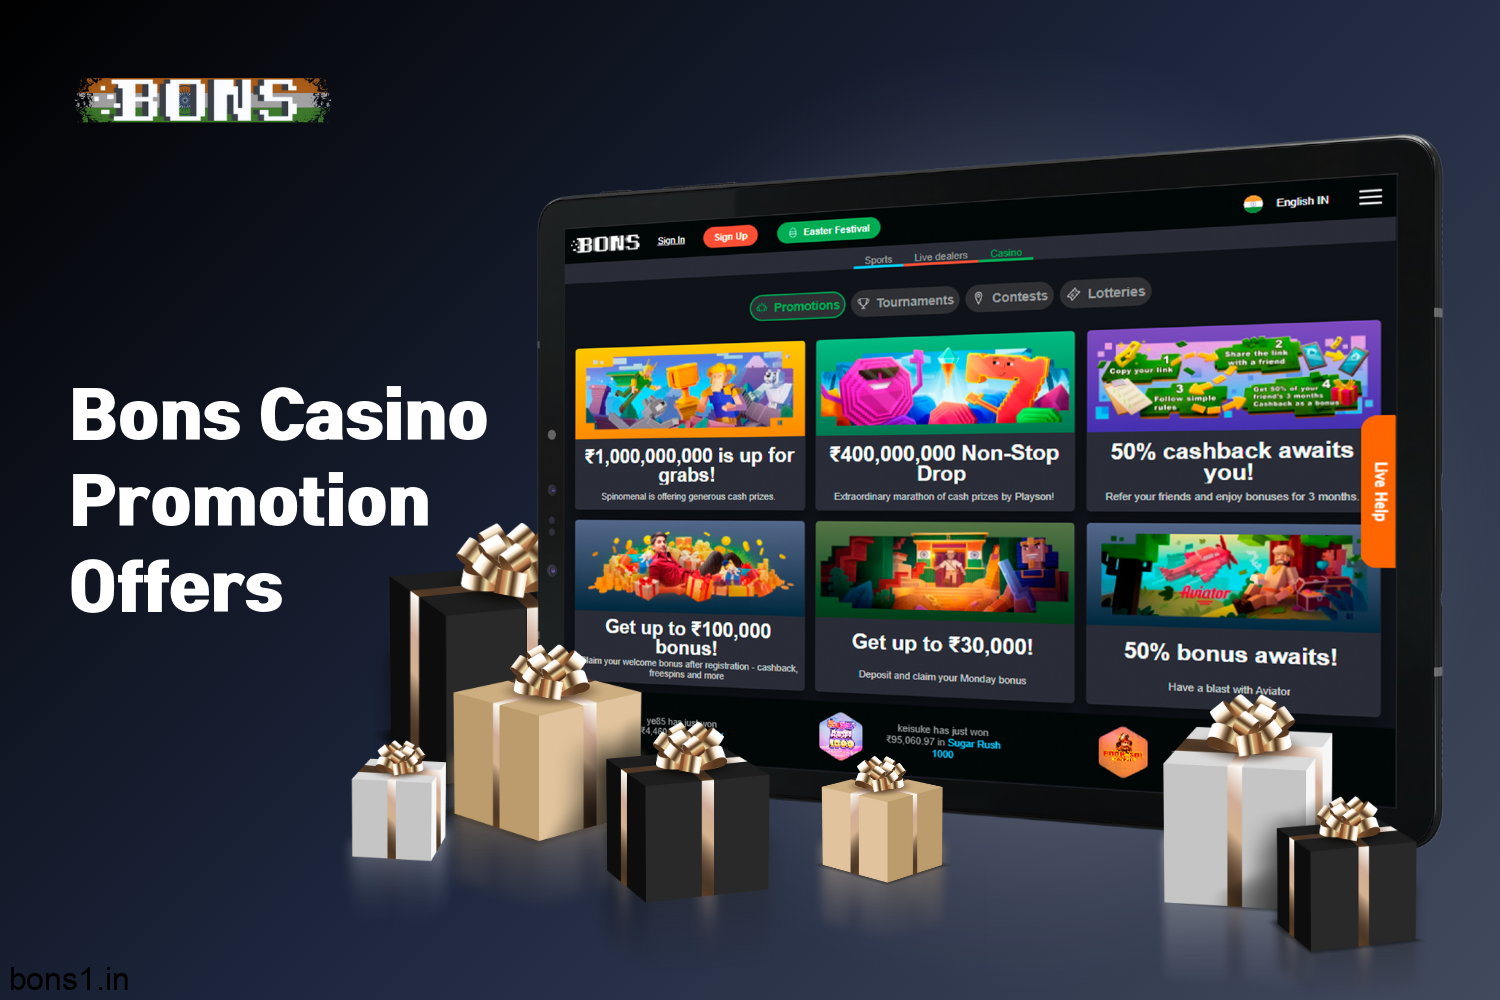 Bons India online casino offers promotions for both new and active players